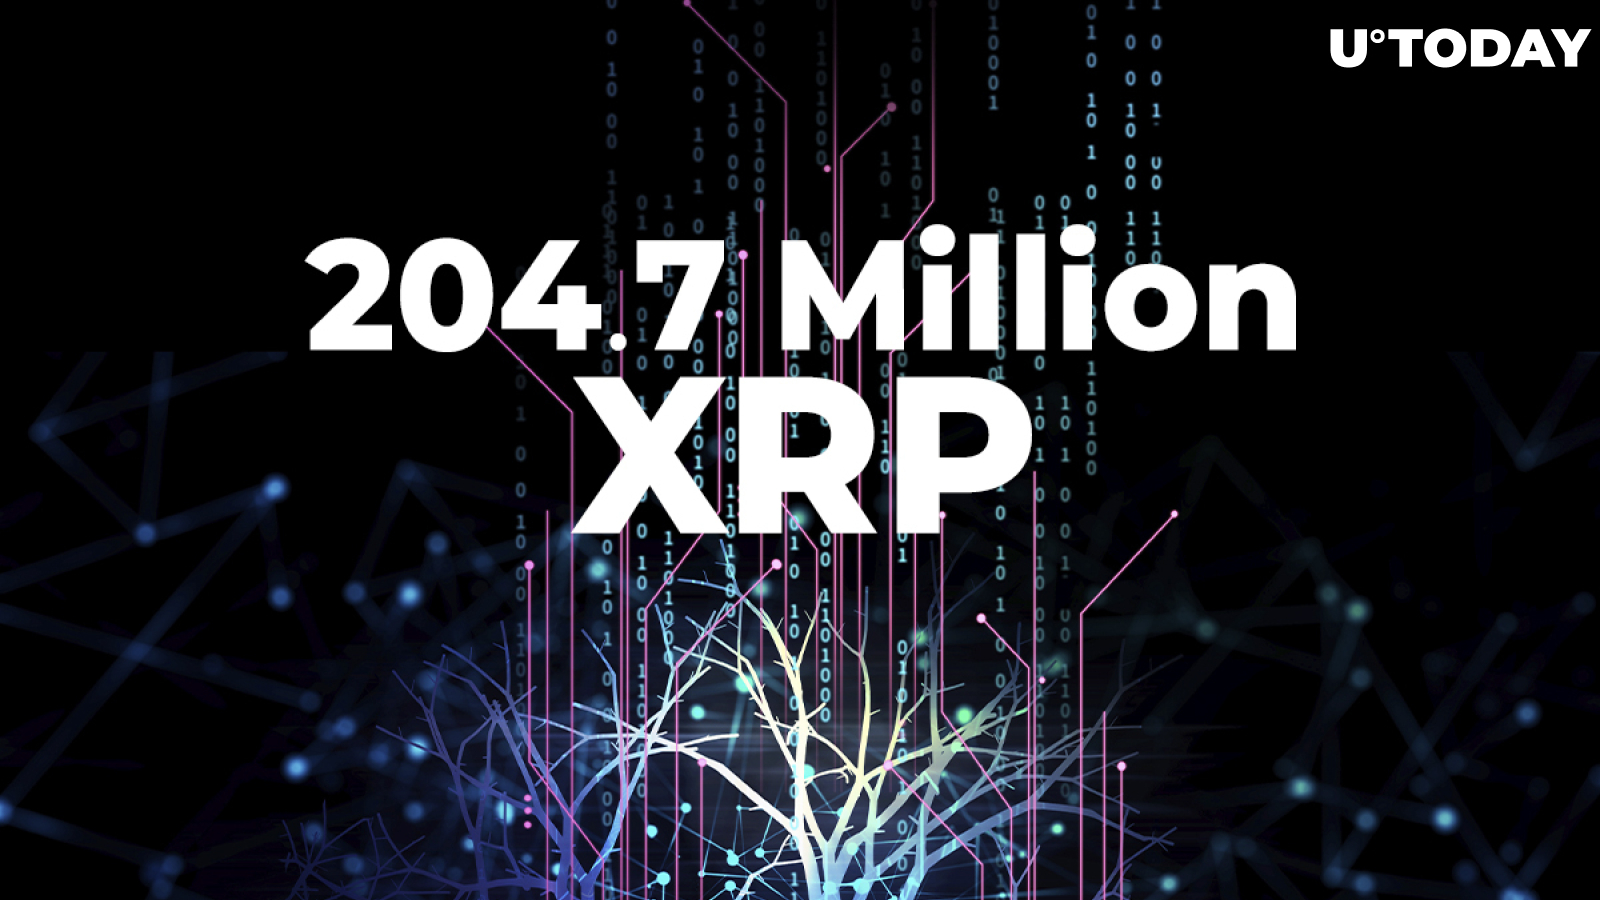 Ripple Participates in Moving 204.7 Million XRP, While Coin Drops to $1.09